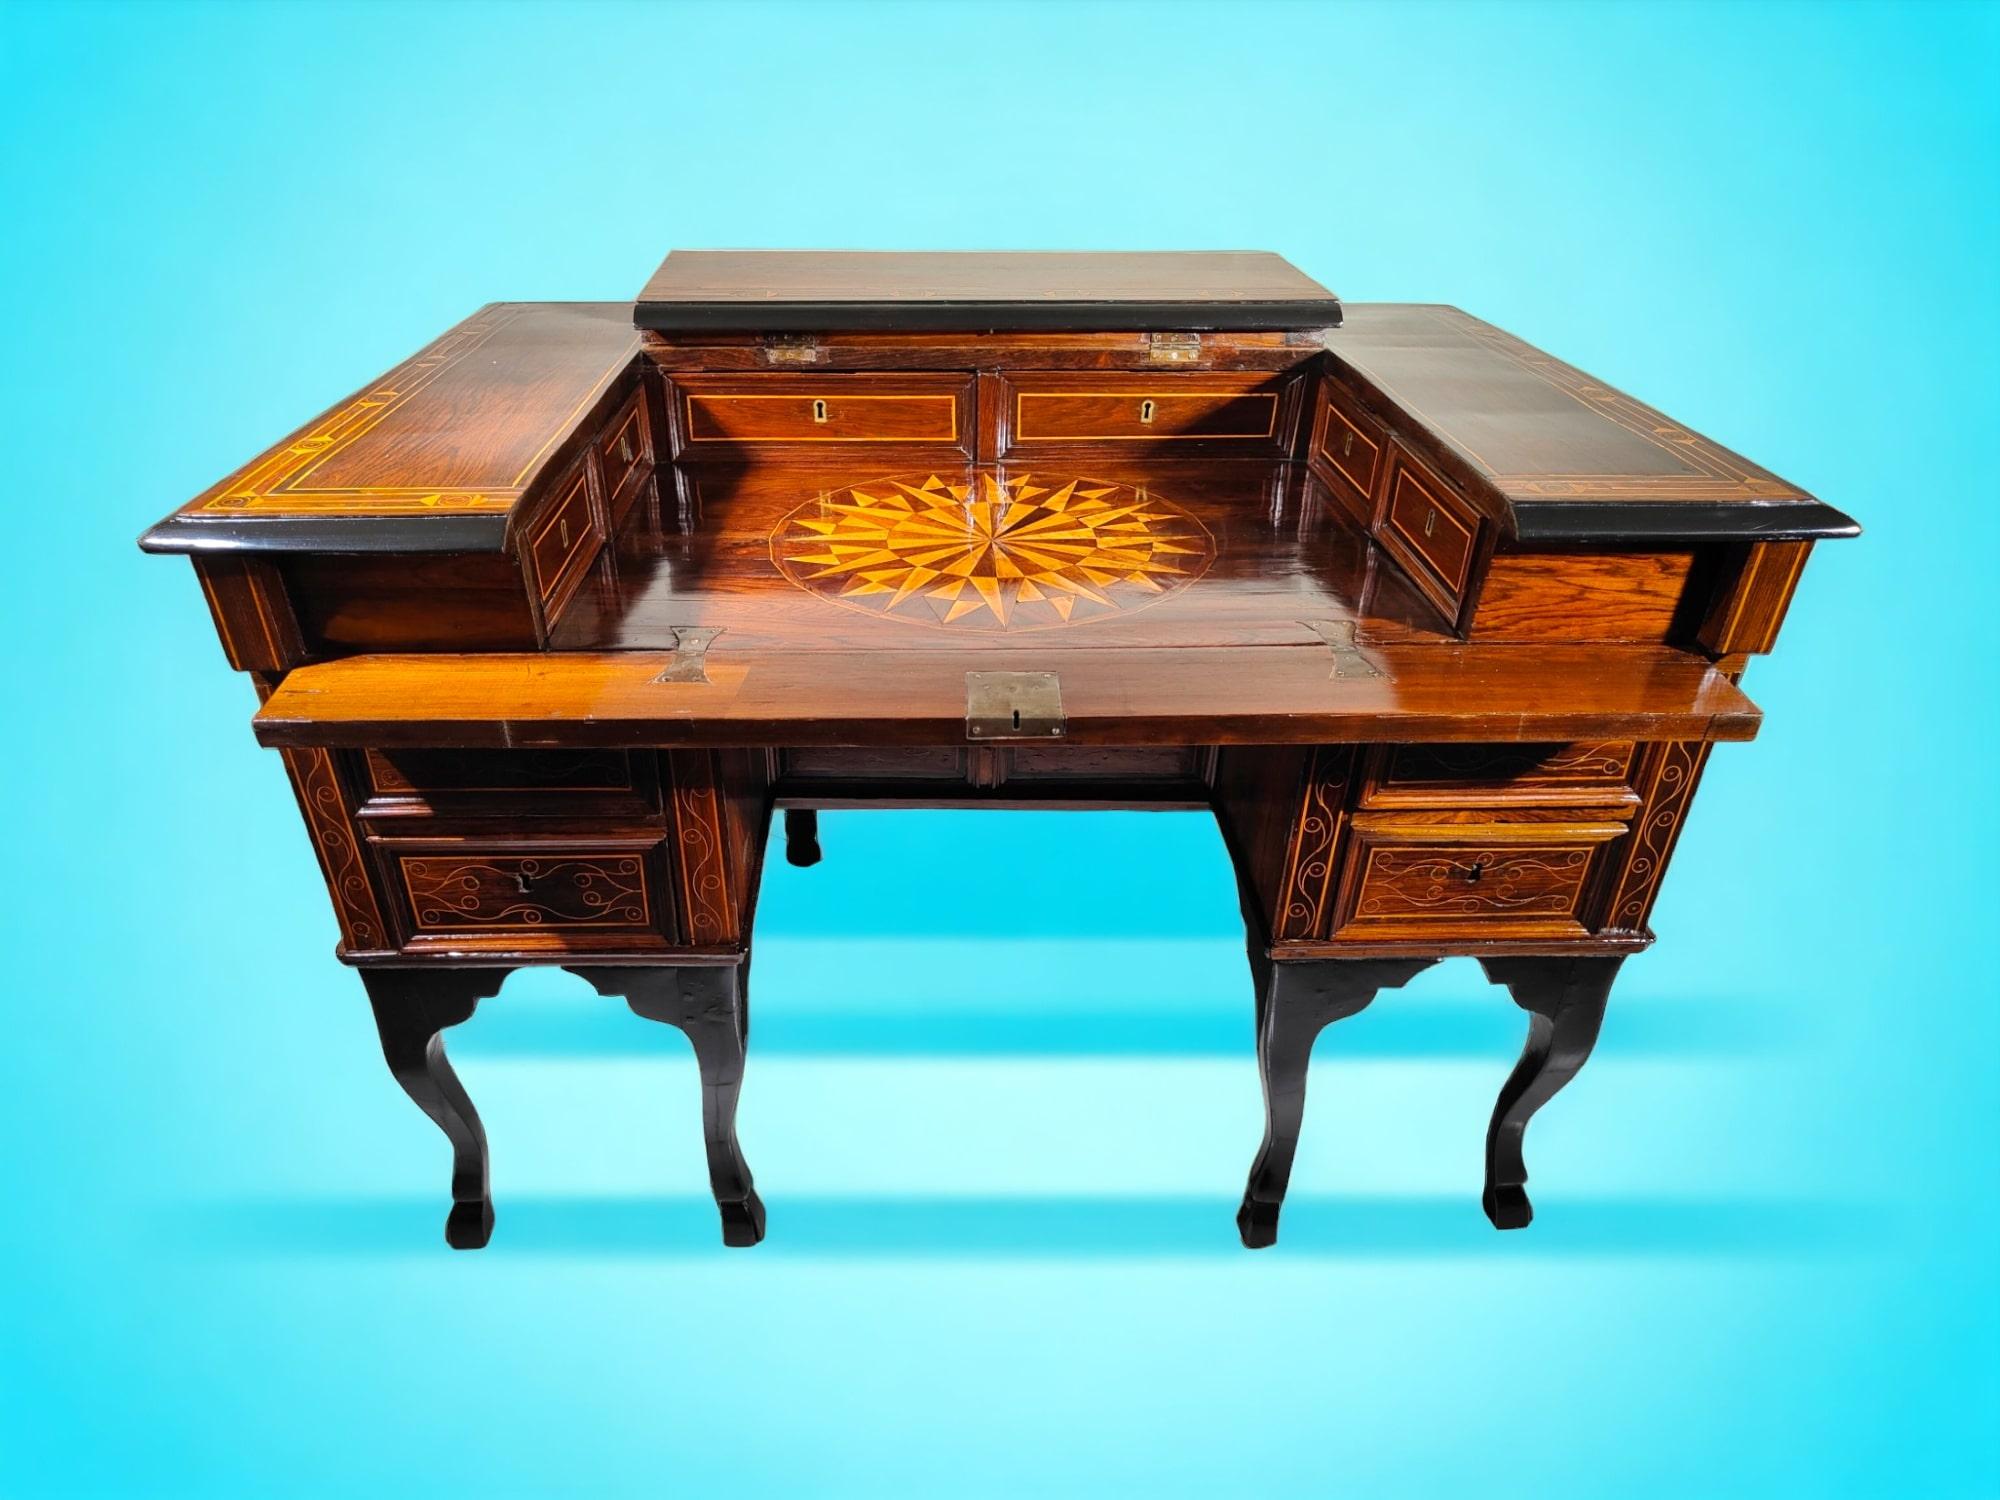 Philippe V Desk From the 17th Century For Sale 14